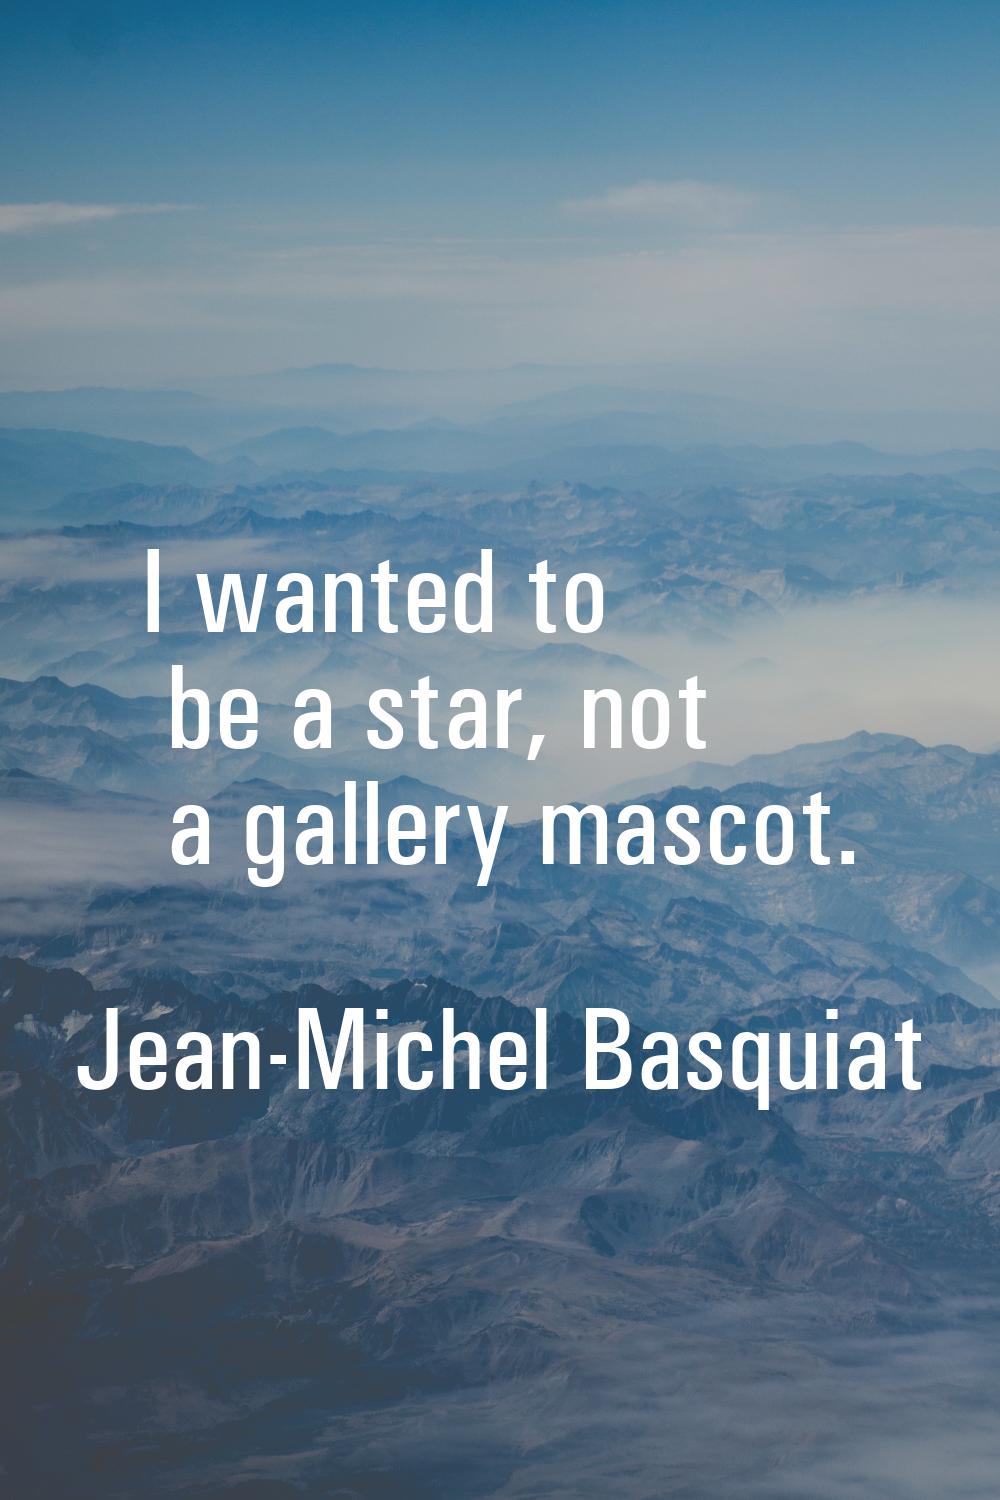 I wanted to be a star, not a gallery mascot.